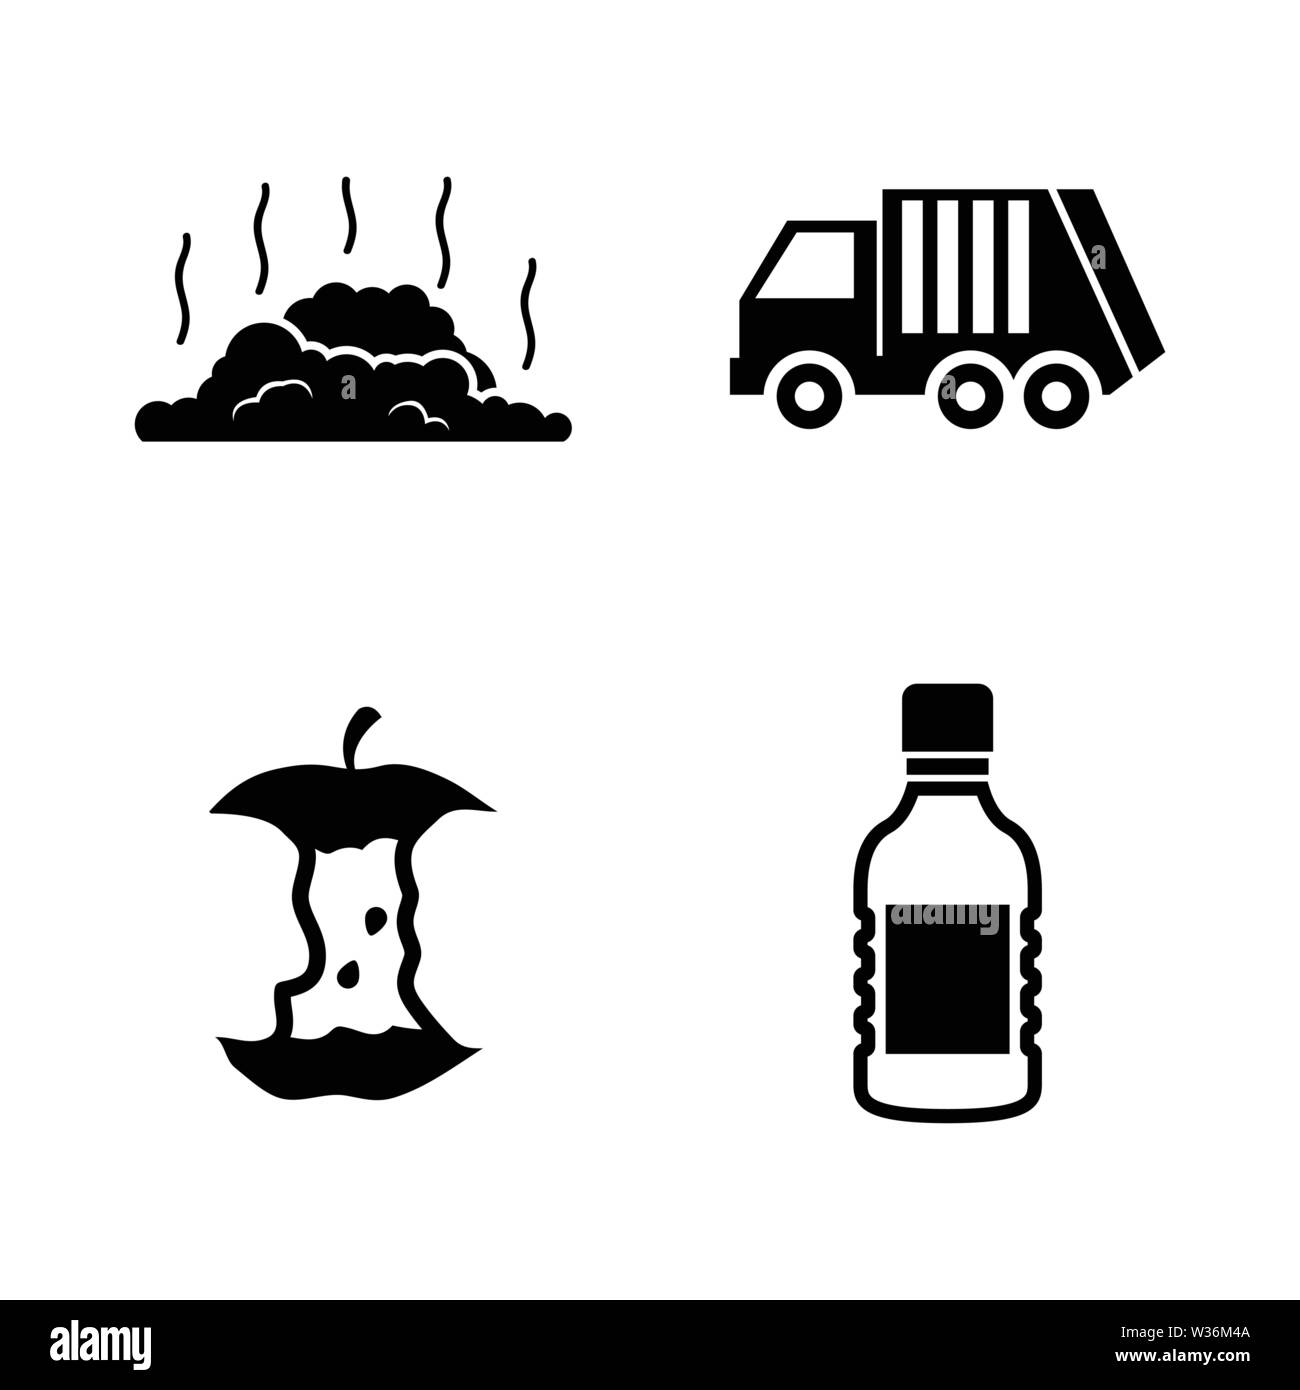 Garbage Waste. Simple Related Vector Icons Set for Video, Mobile Apps, Web Sites, Print Projects and Your Design. Garbage Waste icon Black Flat Illust Stock Vector